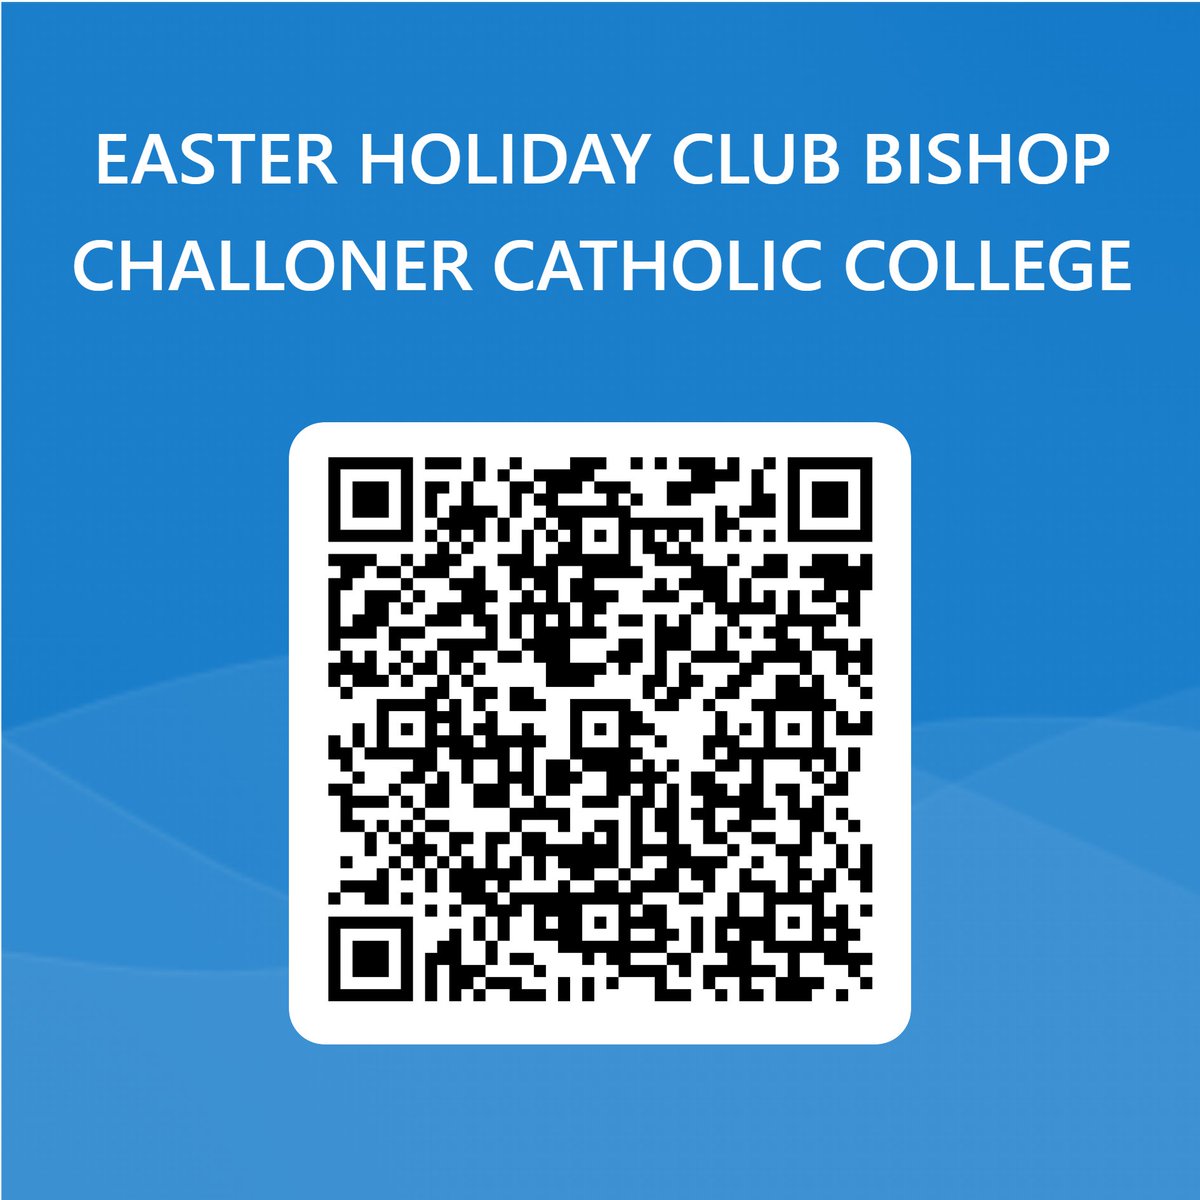 We still have some spaces left for Y7 and Y8 children on our Easter Holiday Club - Monday 25th March to Thursday 28th March - Sign up now! @BishopChalloner @BCSGO @bctsa_training